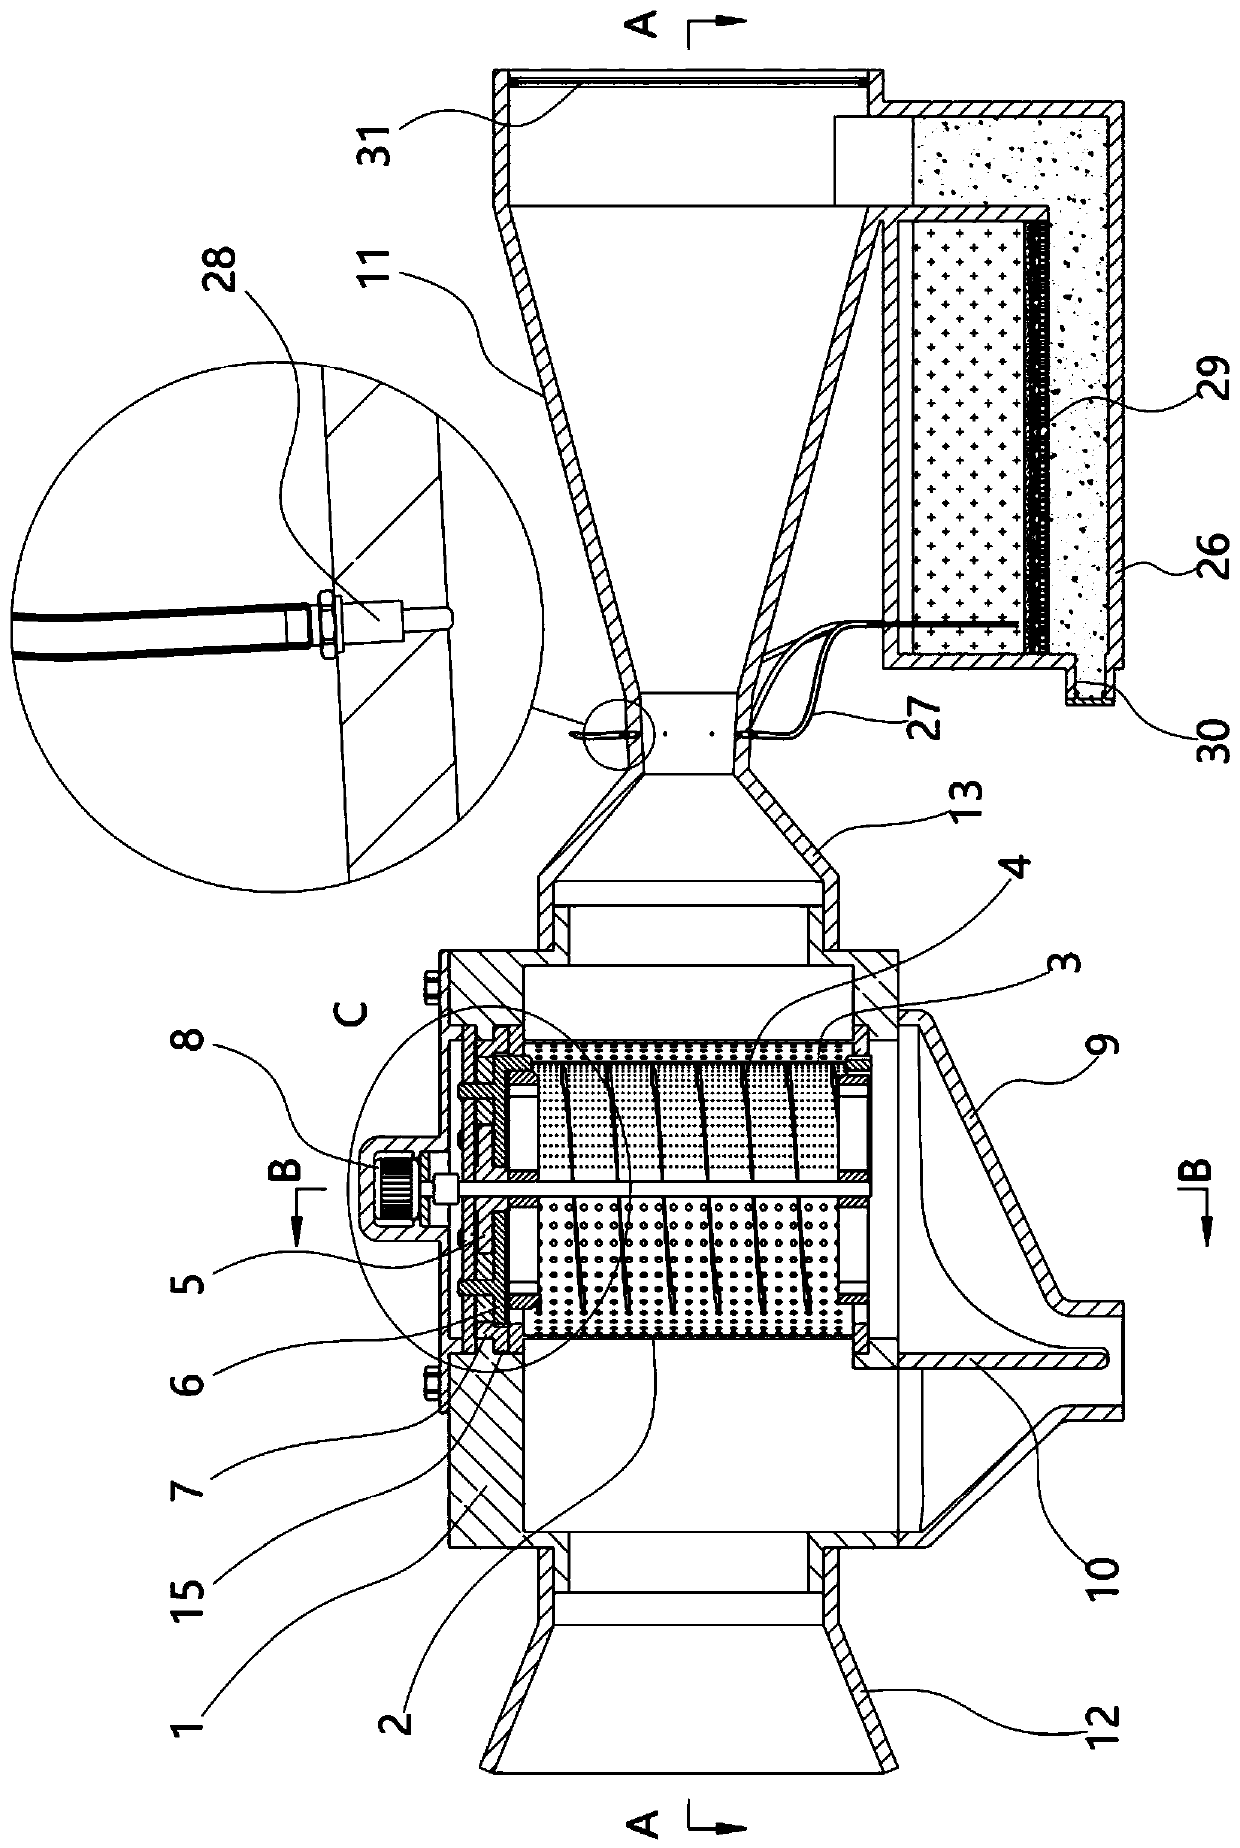 Dust collection device for highway construction